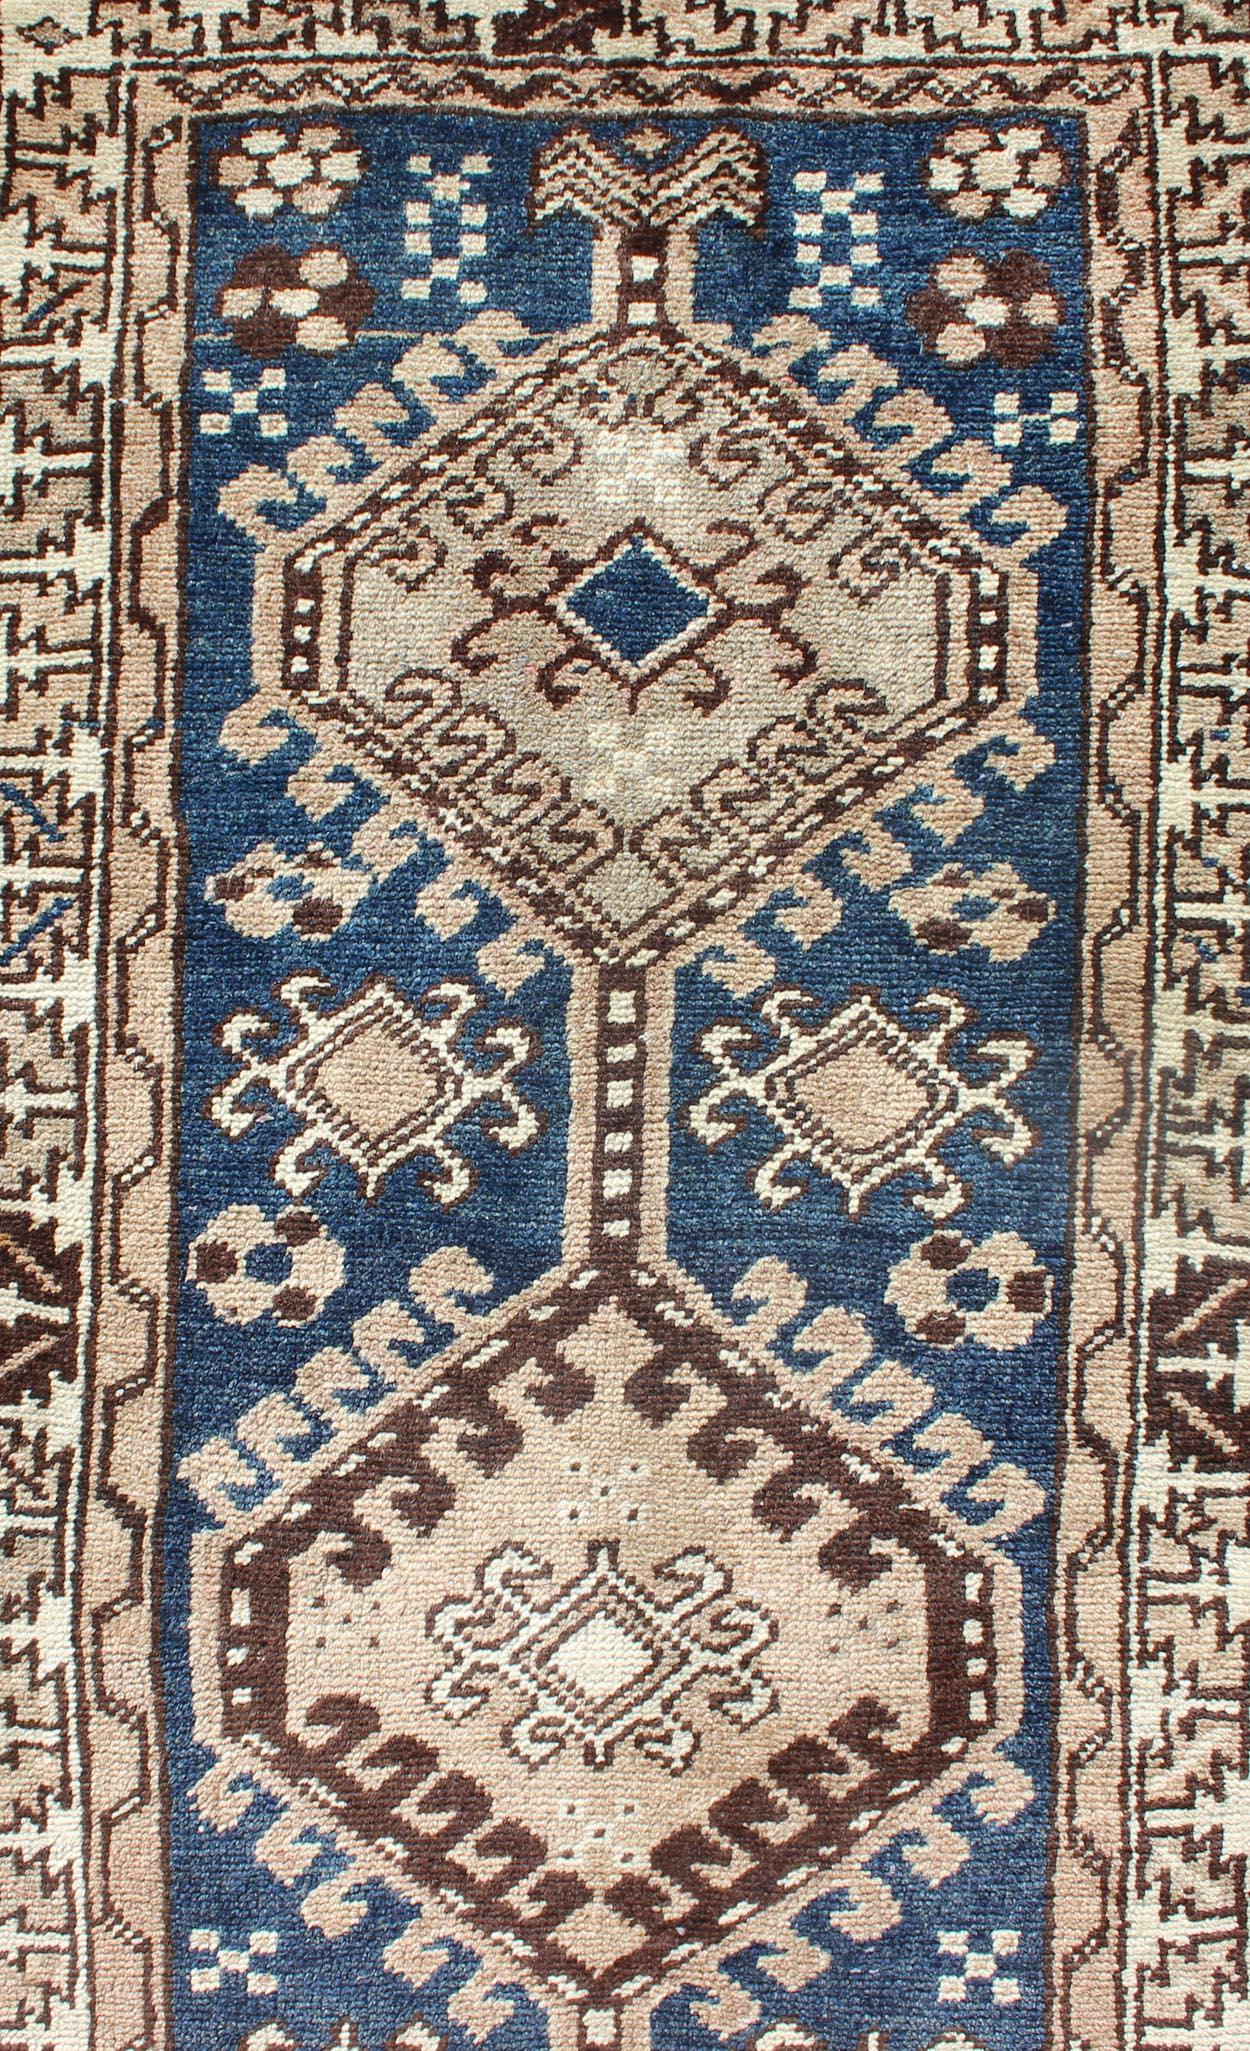 Antique Blue Tribal Karajeh Runner With Navy Blue, Brown and Earth Tones For Sale 1